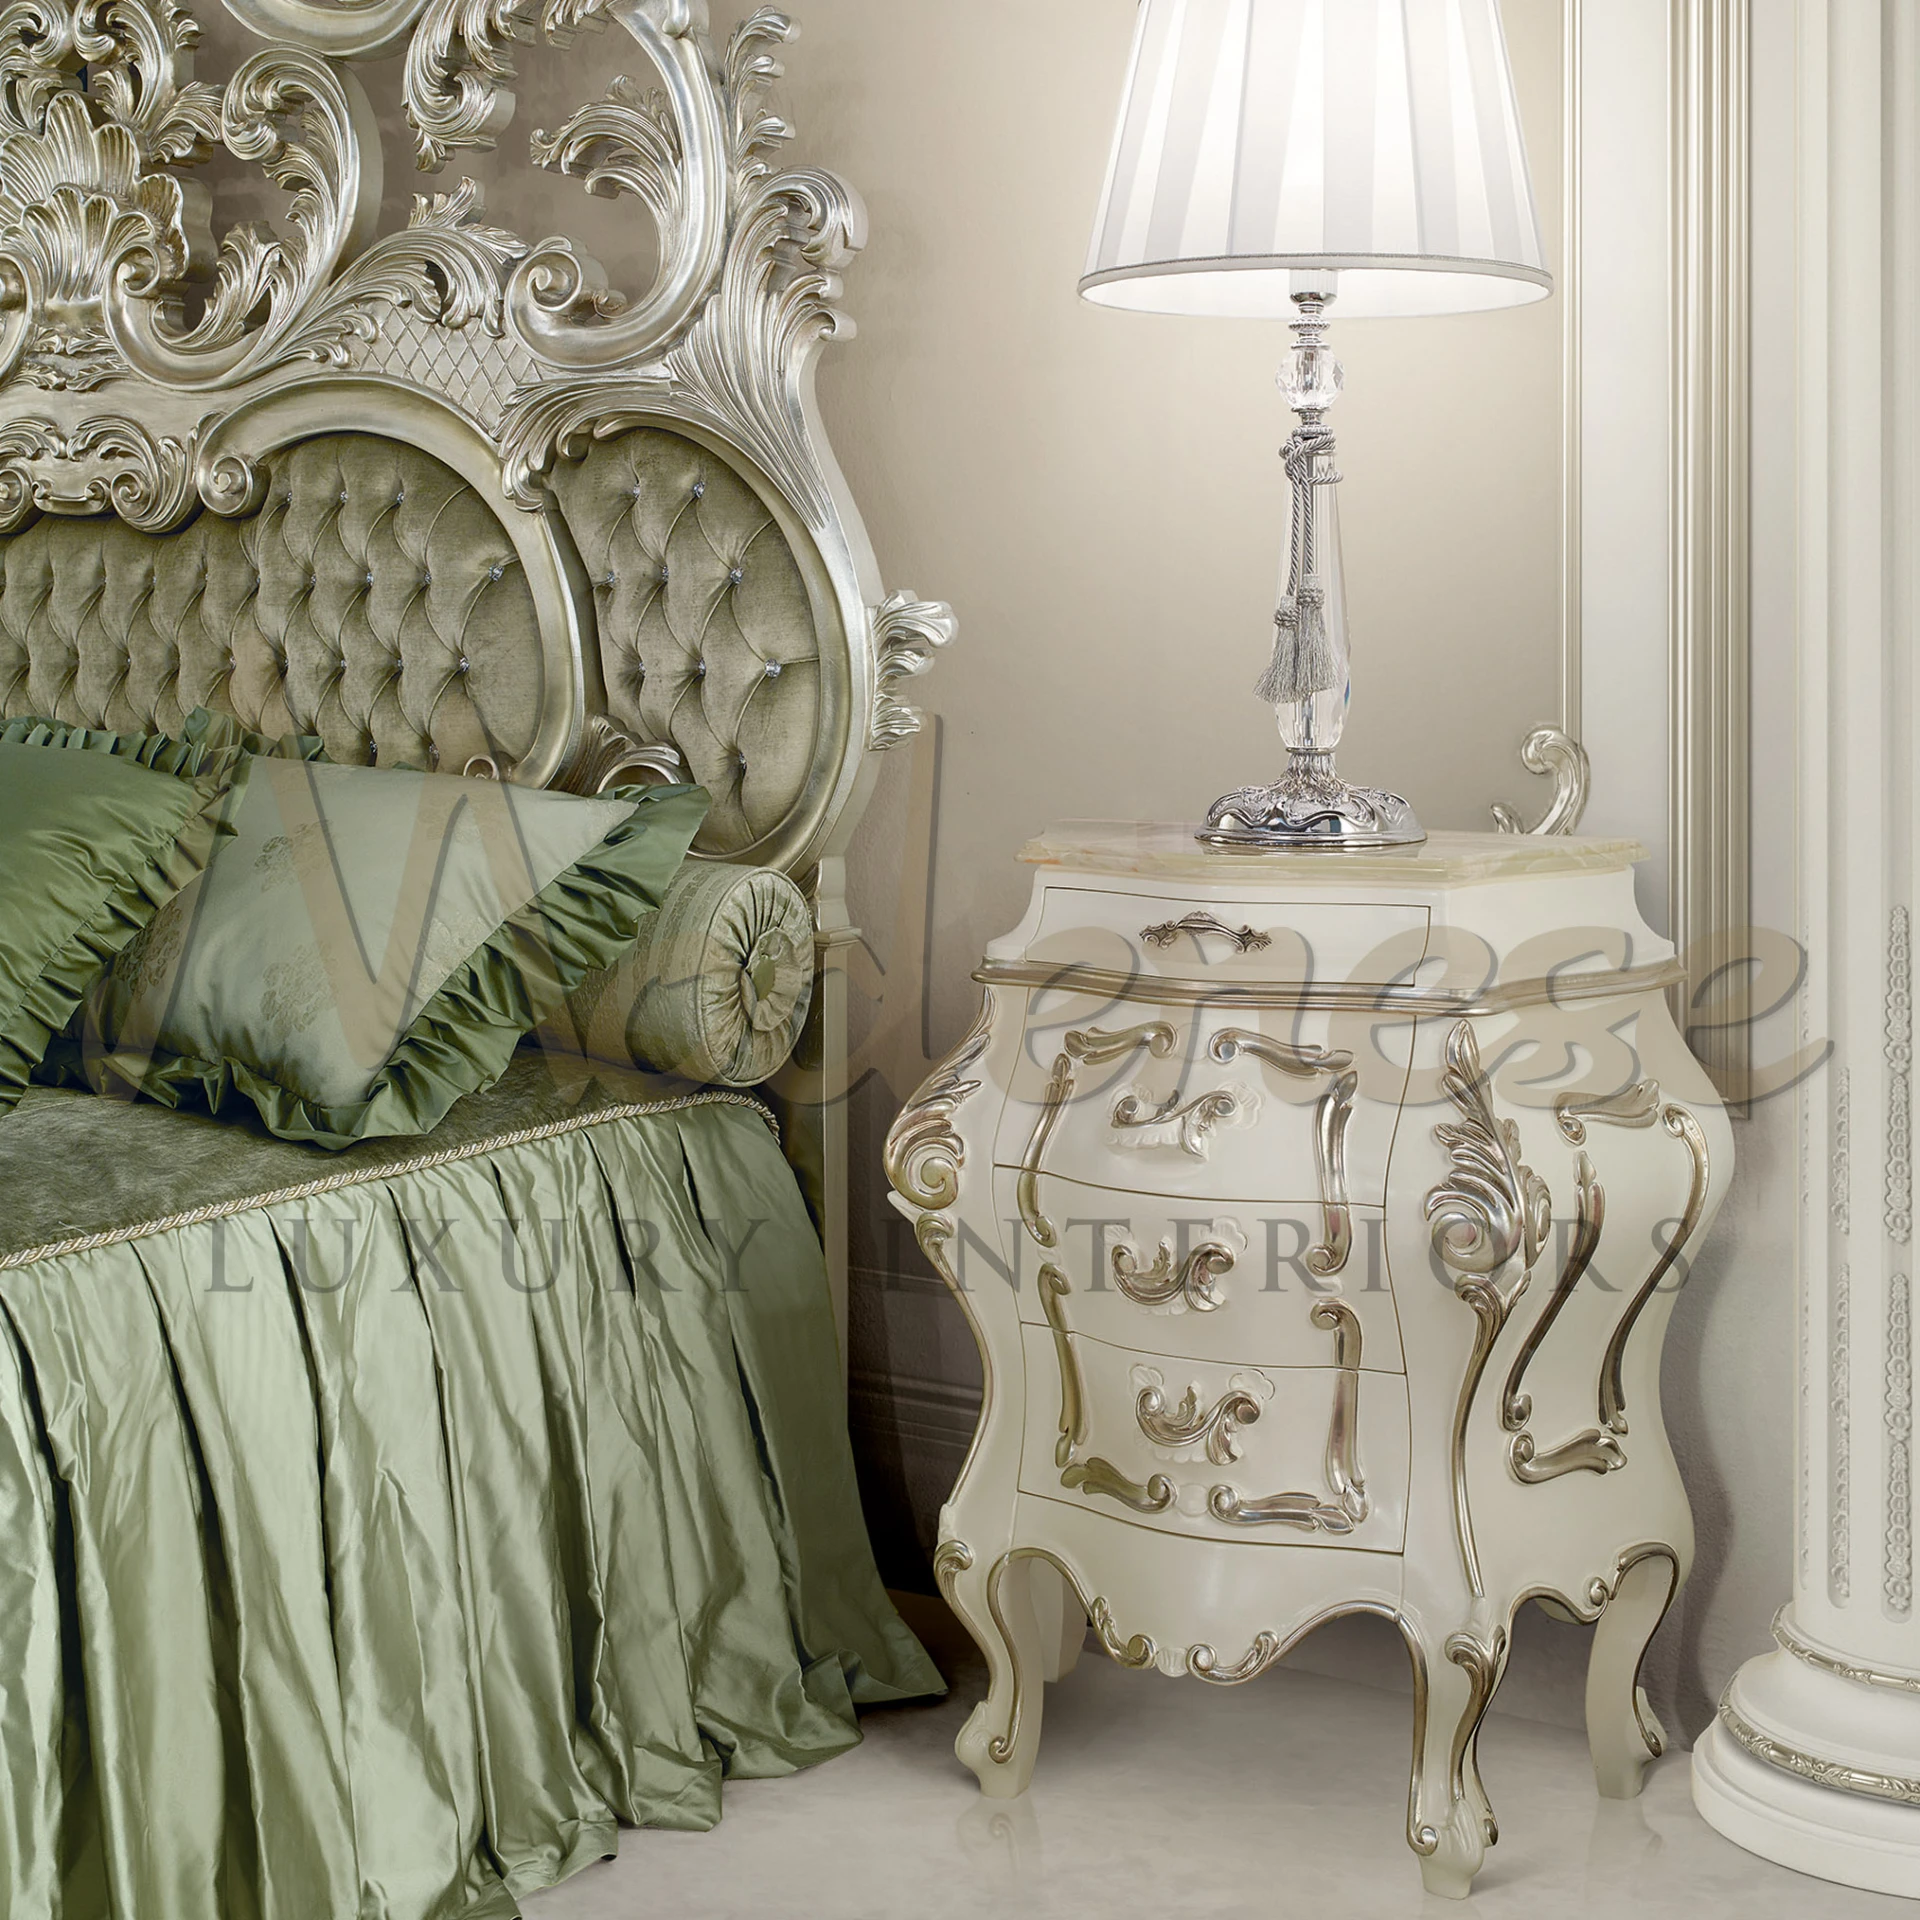 A corner of a sophisticated bedroom featuring a portion of a bed with a tufted olive green headboard boasting elaborate silver carvings. A matching green bedspread contributes to the luxurious feel. 